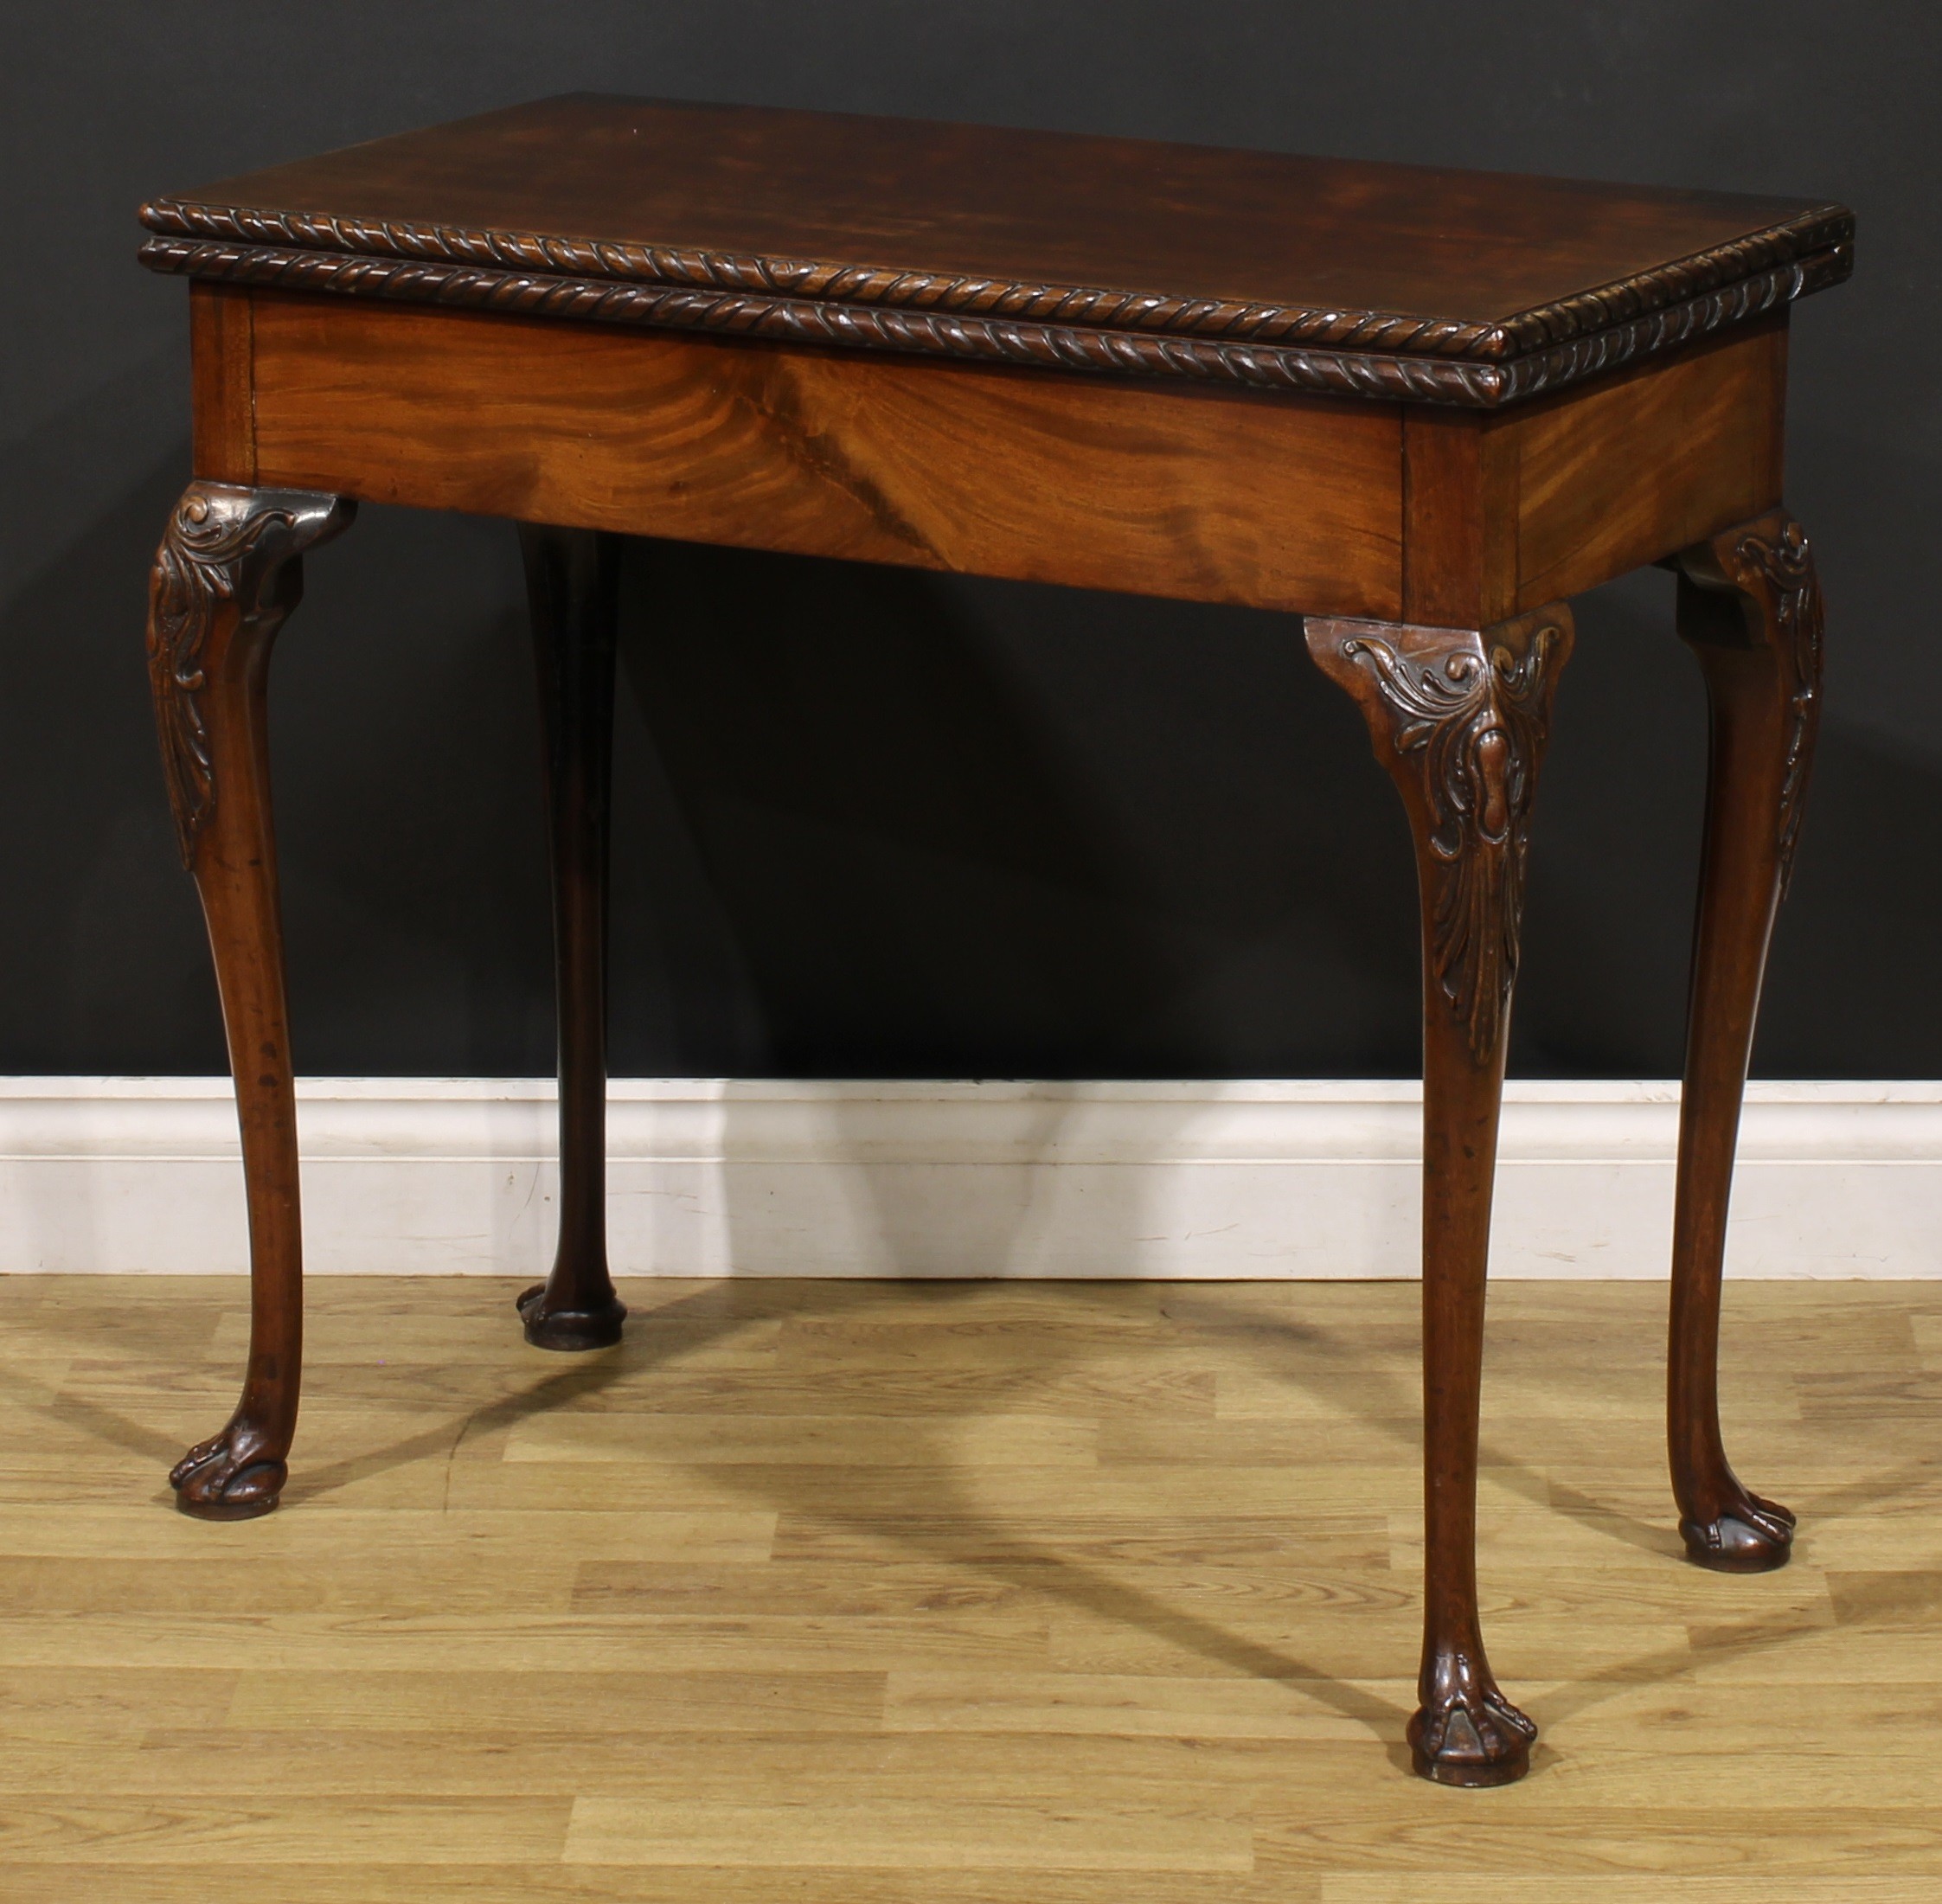 A 19th century mahogany card table, possibly Irish, hinged top with gadroon-and-ribbon edge - Image 5 of 6